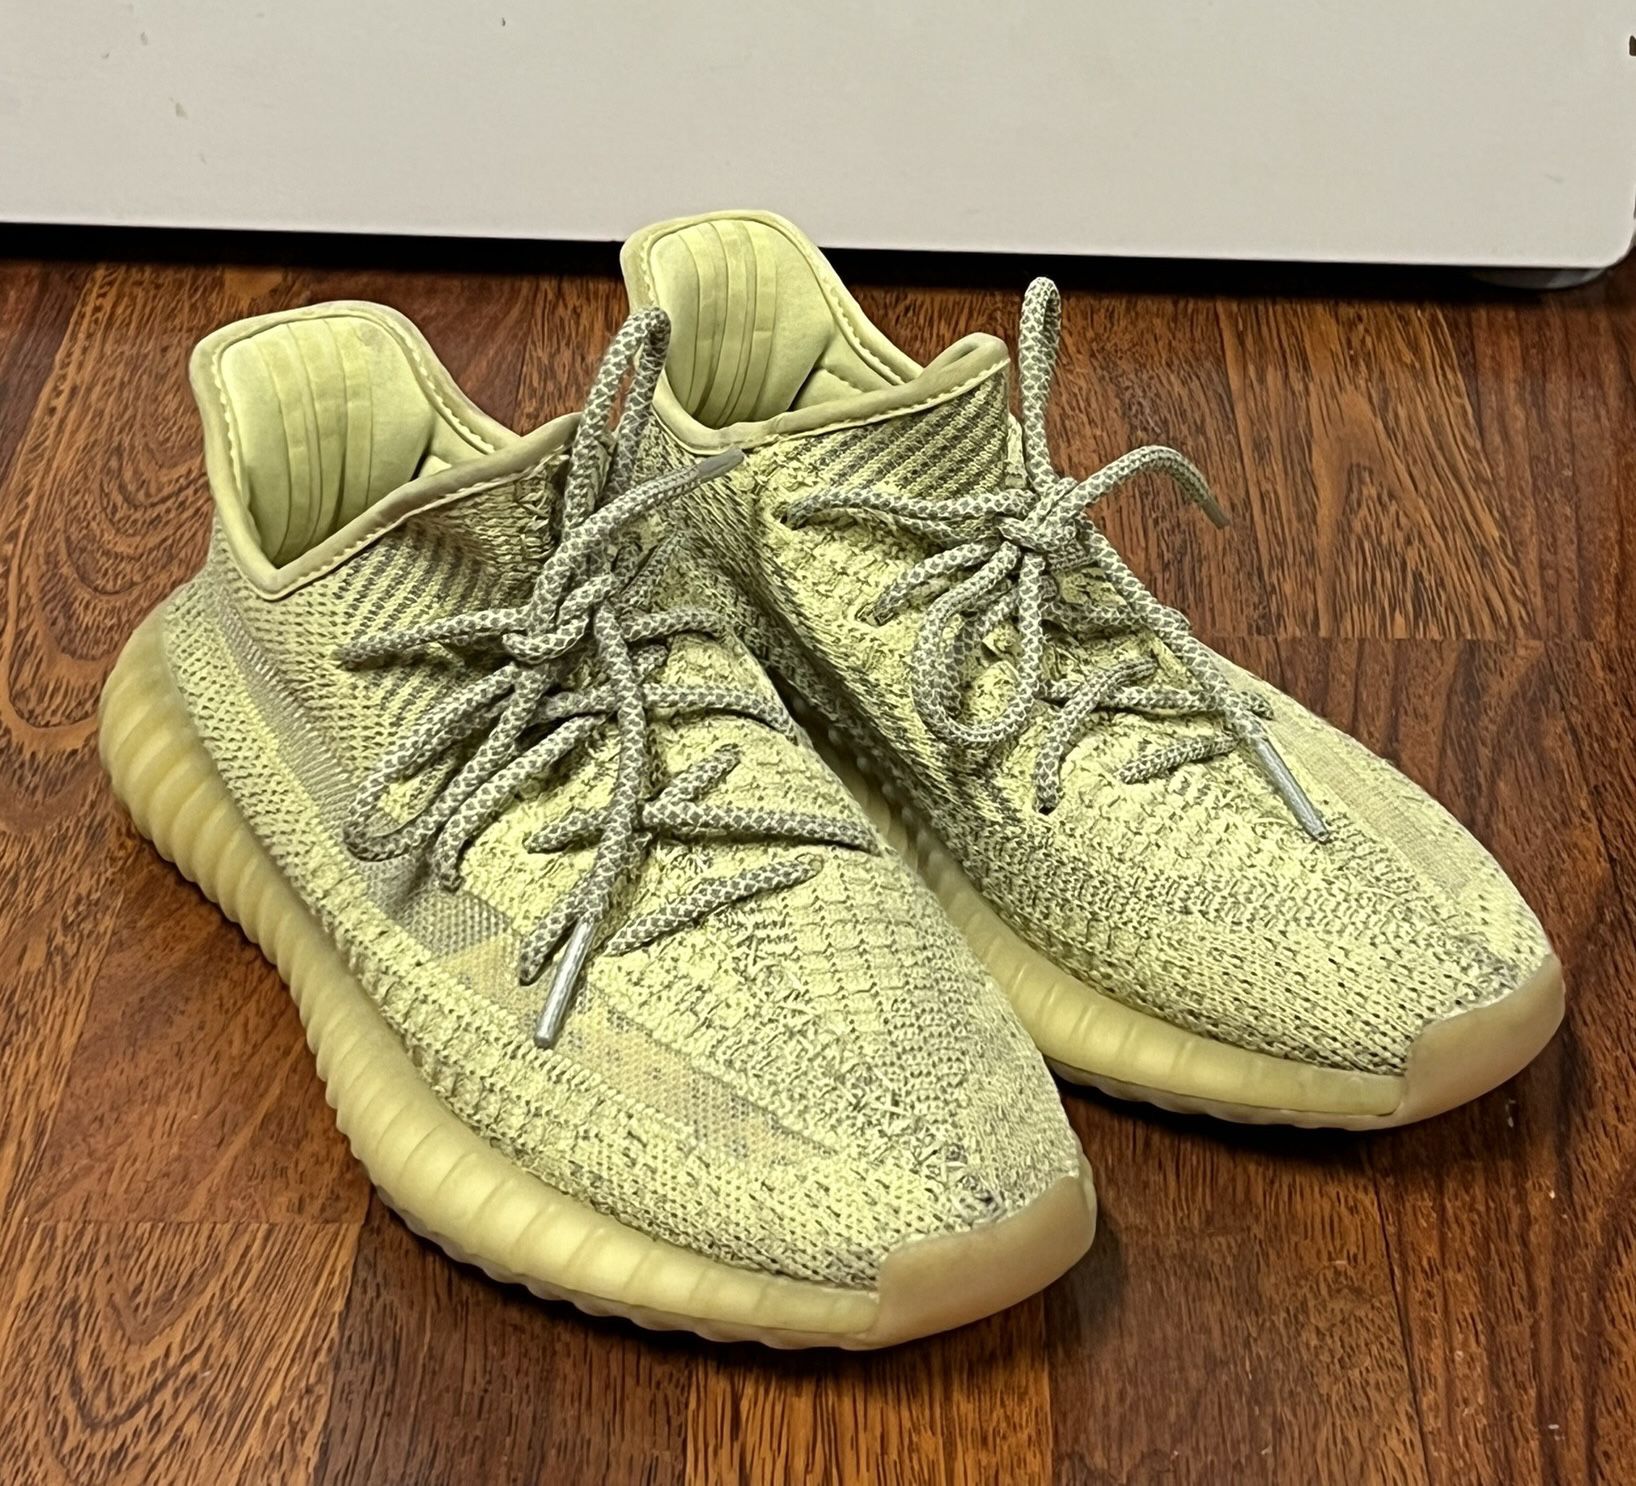 Vooruitgang Menselijk ras Kinderen $180 OBO Size 8 - Adidas Yeezy Boost 350 V2 Antlia Non Reflective FV3250  USED No Box - Good Condition for Sale in San Jose, CA - OfferUp